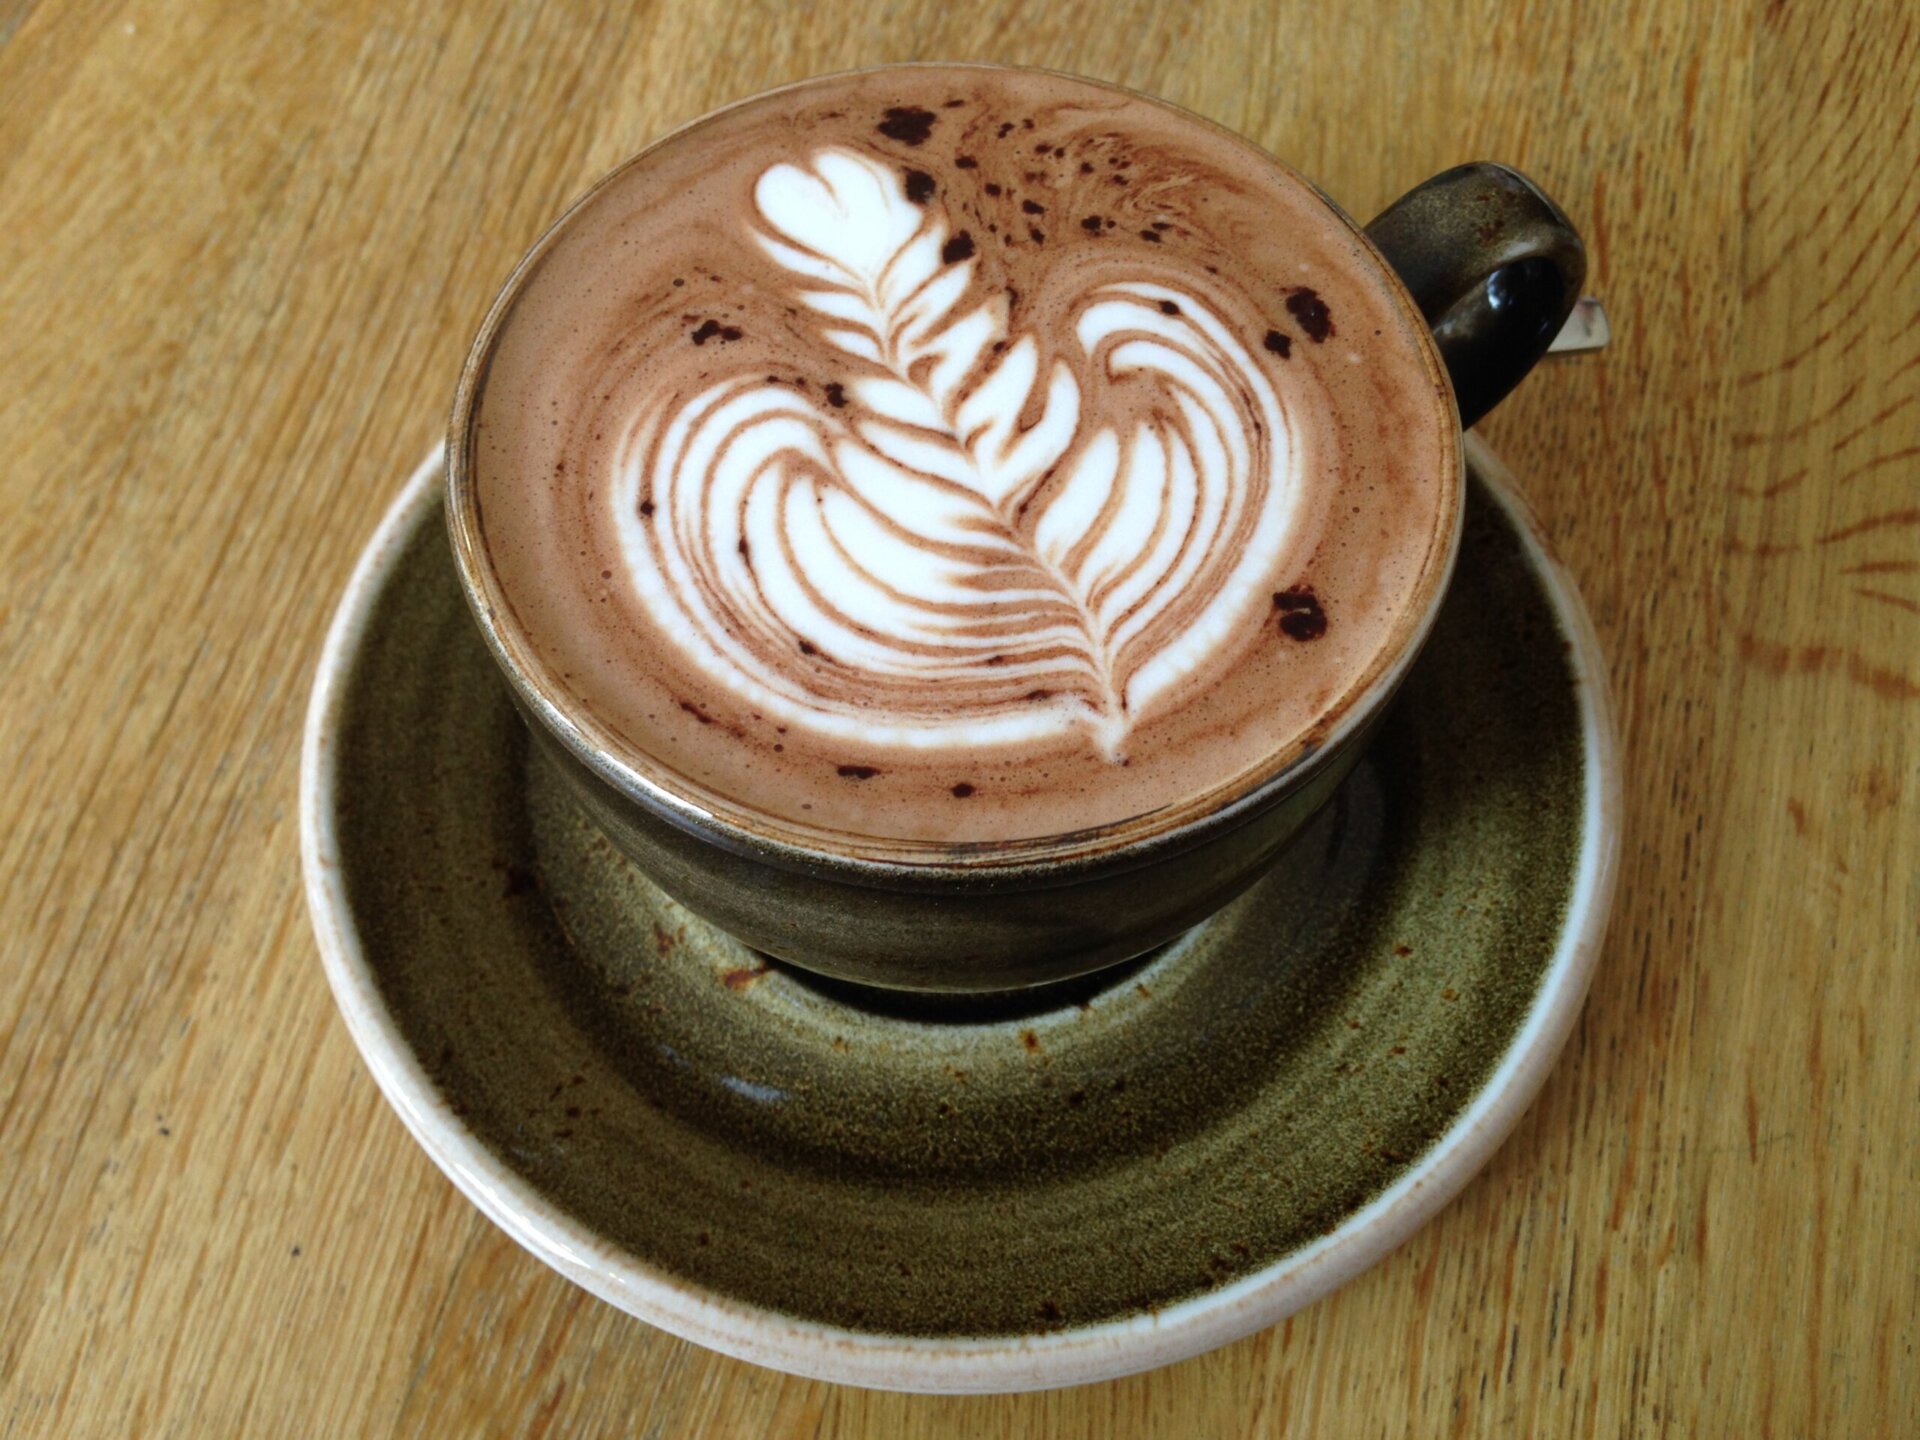 best independent coffee shops in edinburgh - cappuccino coffee